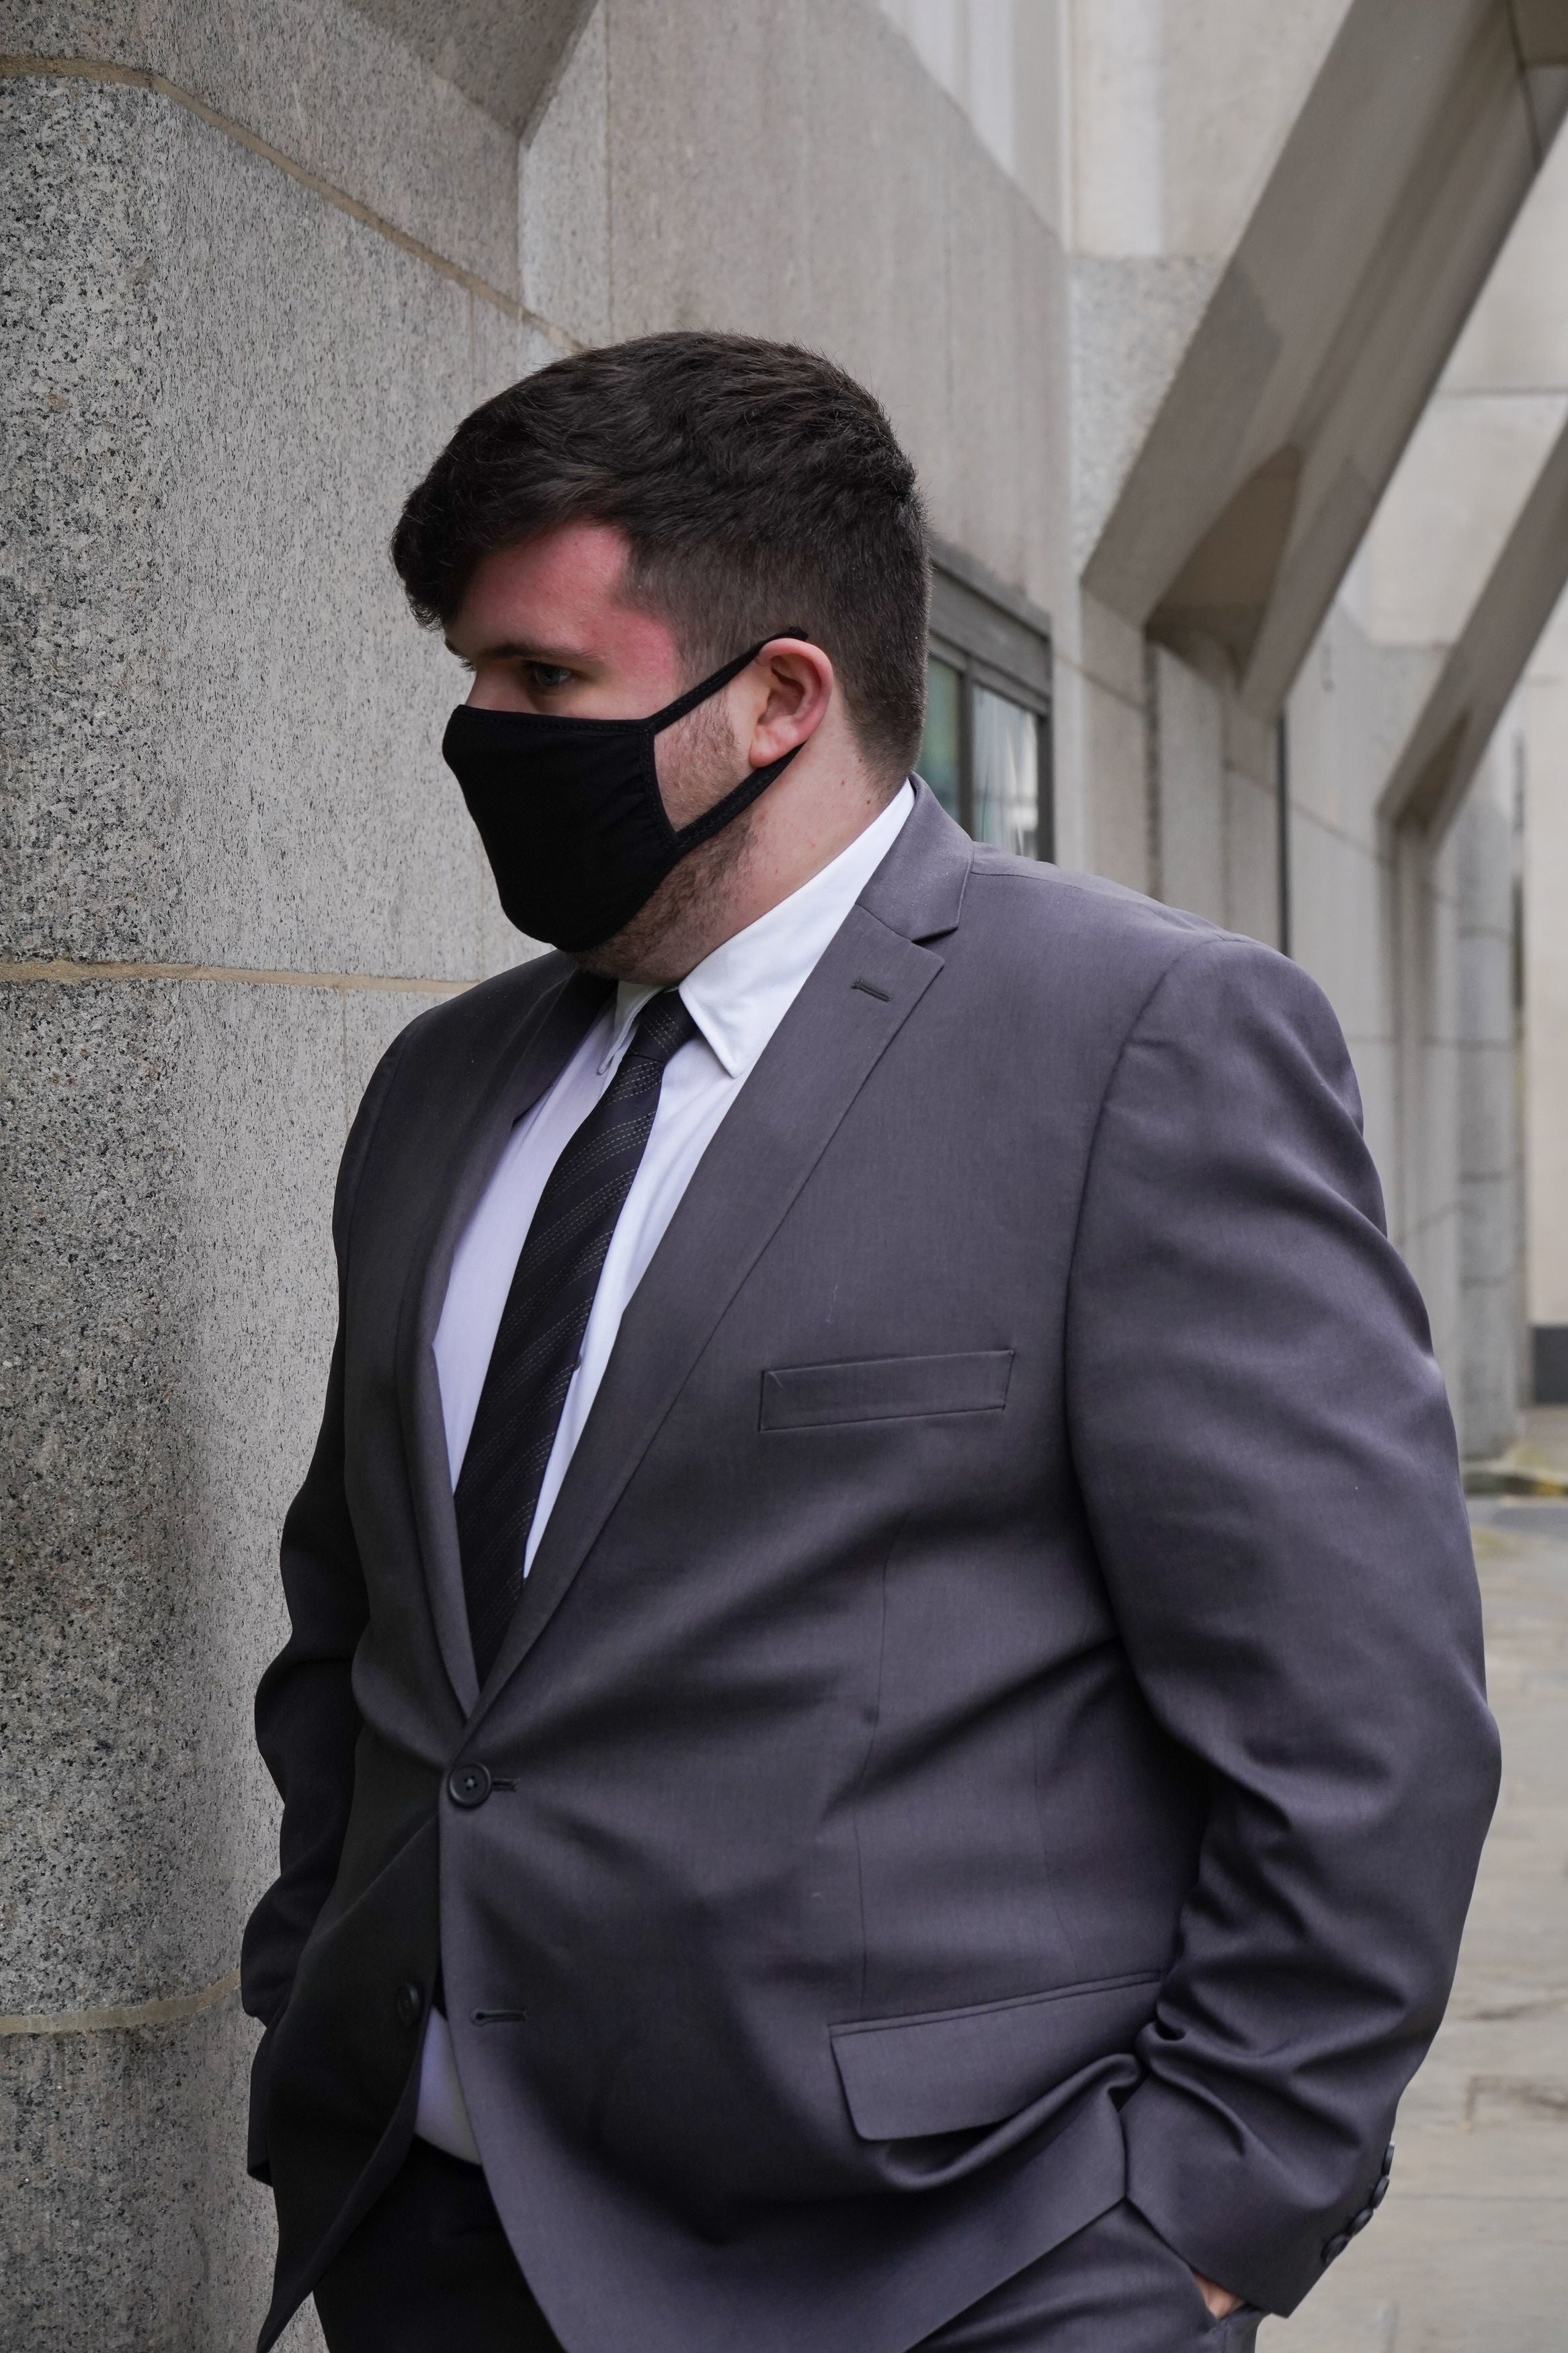 Jacob Crimi-Appleby previously arriving at the Old Bailey in central London, where he pleaded guilty to causing grievous bodily harm with intent to Marius Gustavson in February 2019 eiqrdiqutiqdhinv